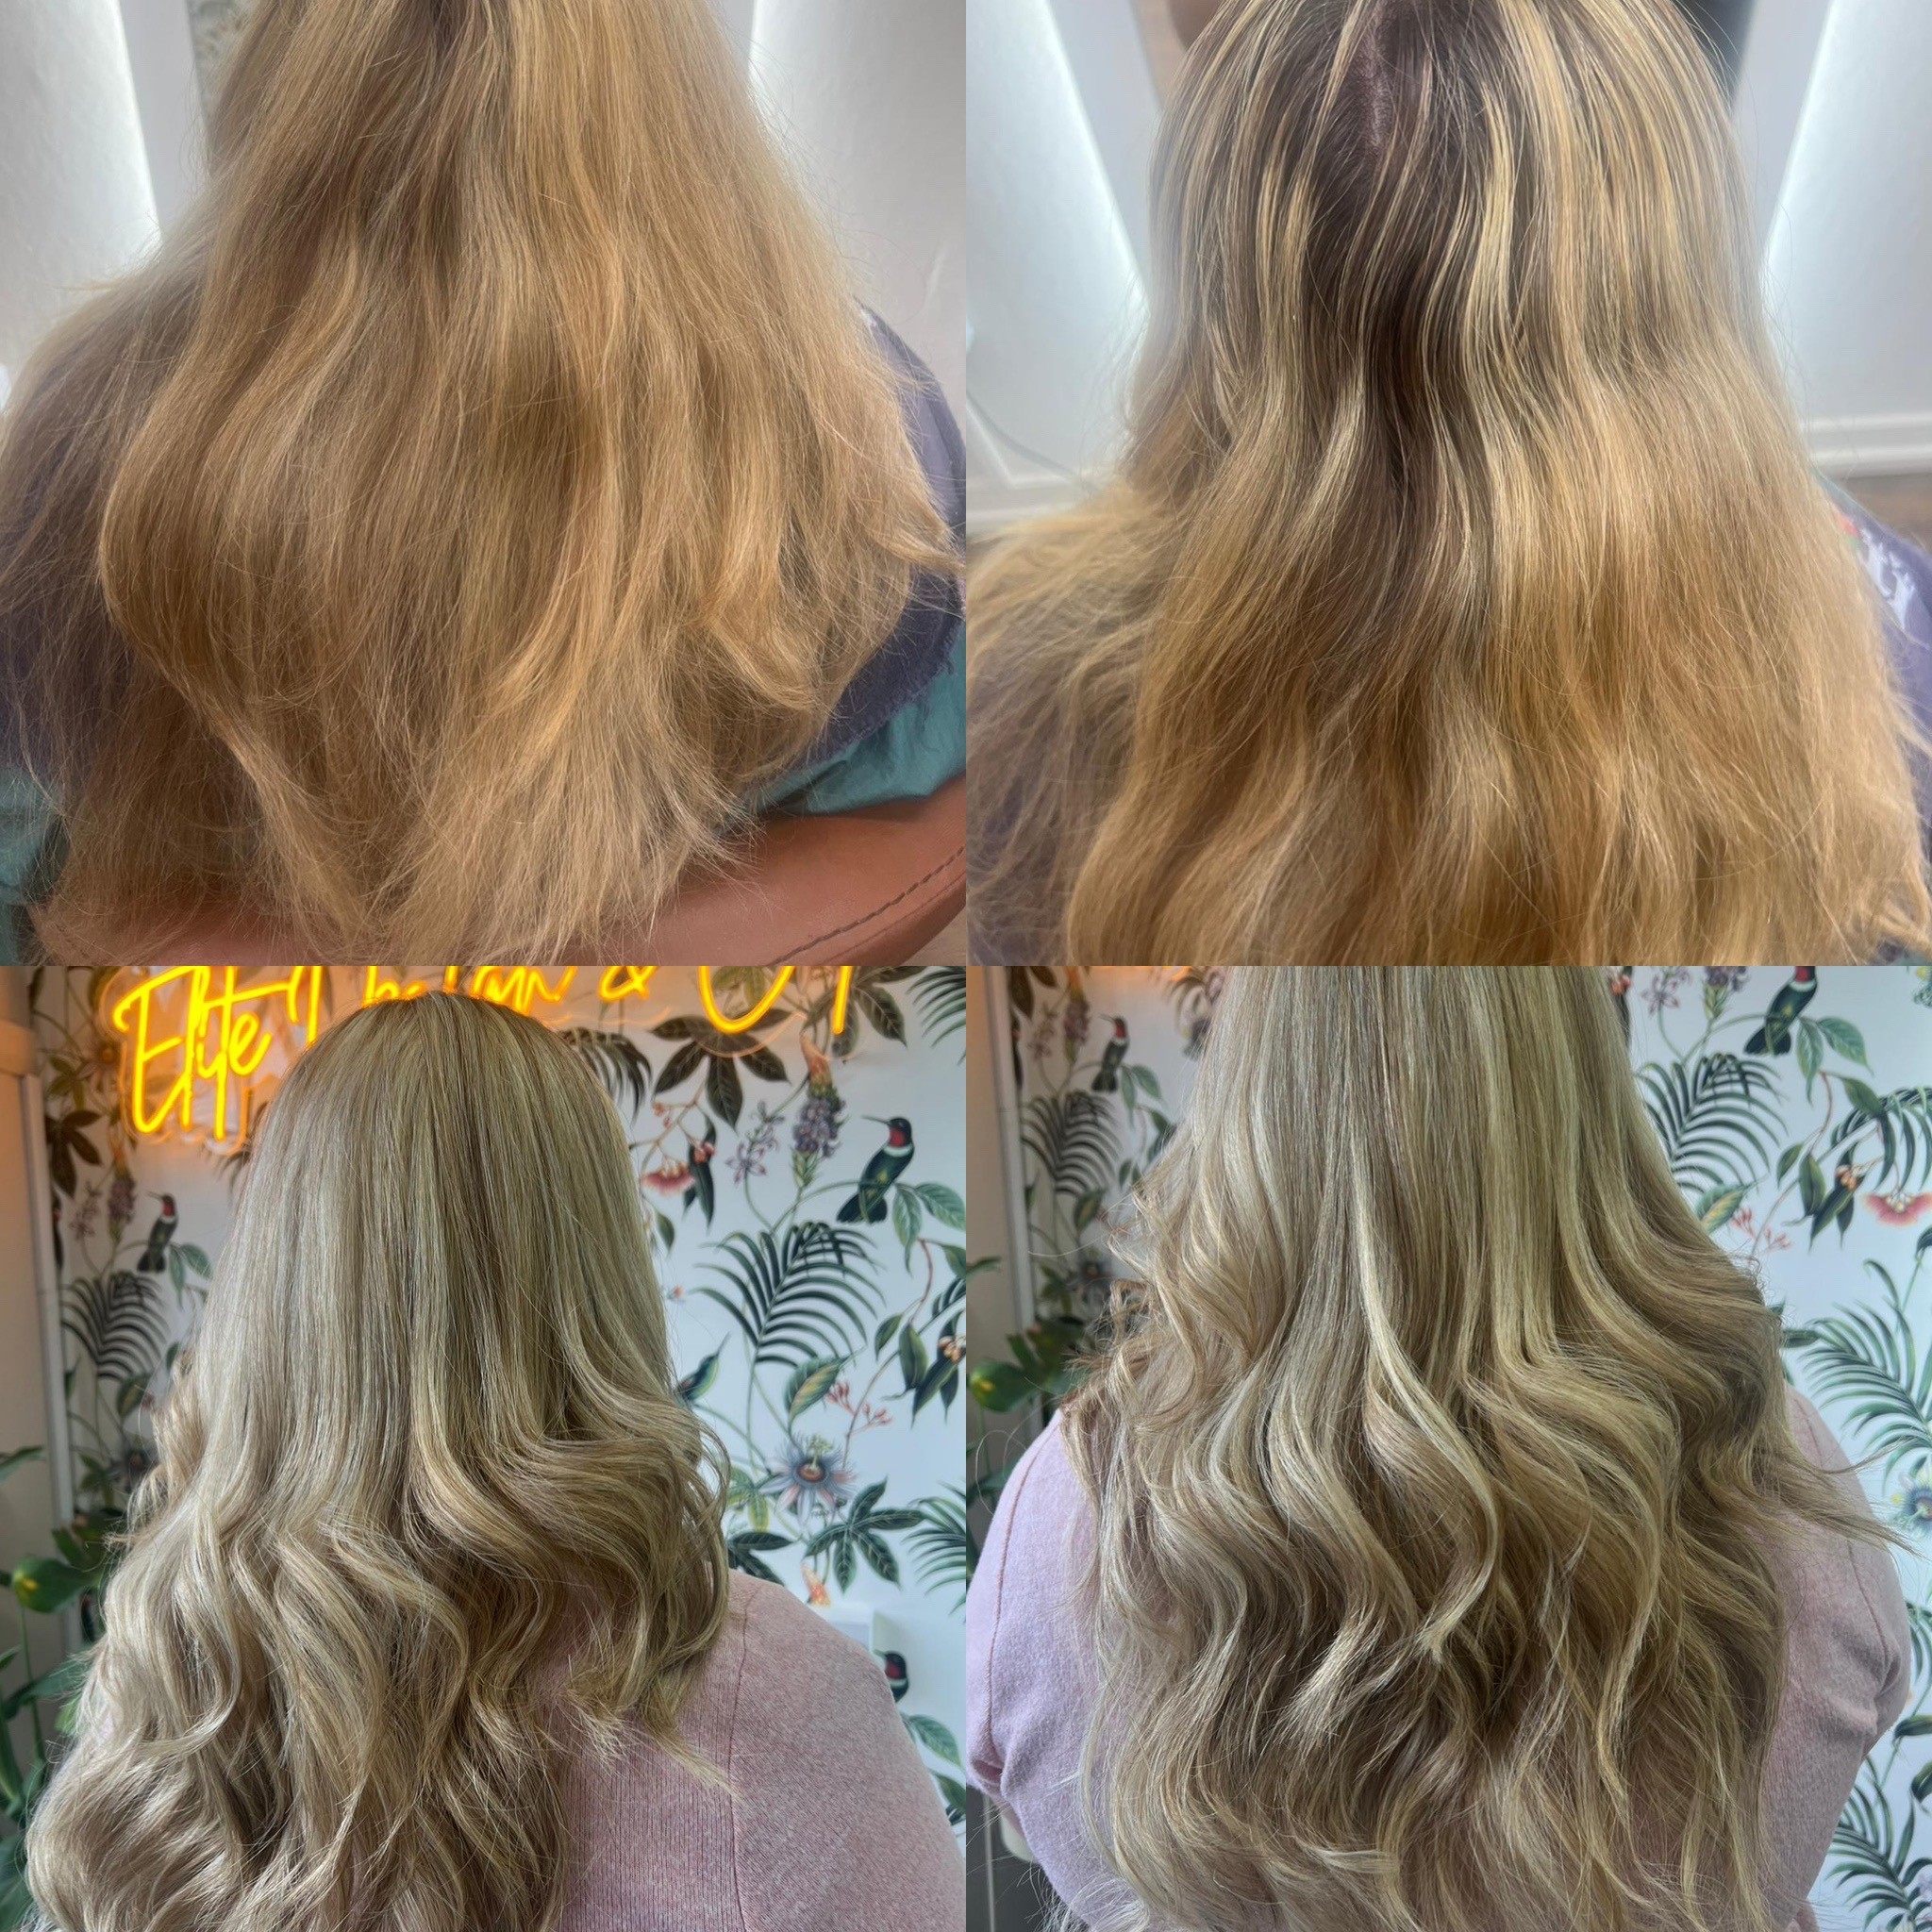 Highlights toner and curly blow drying